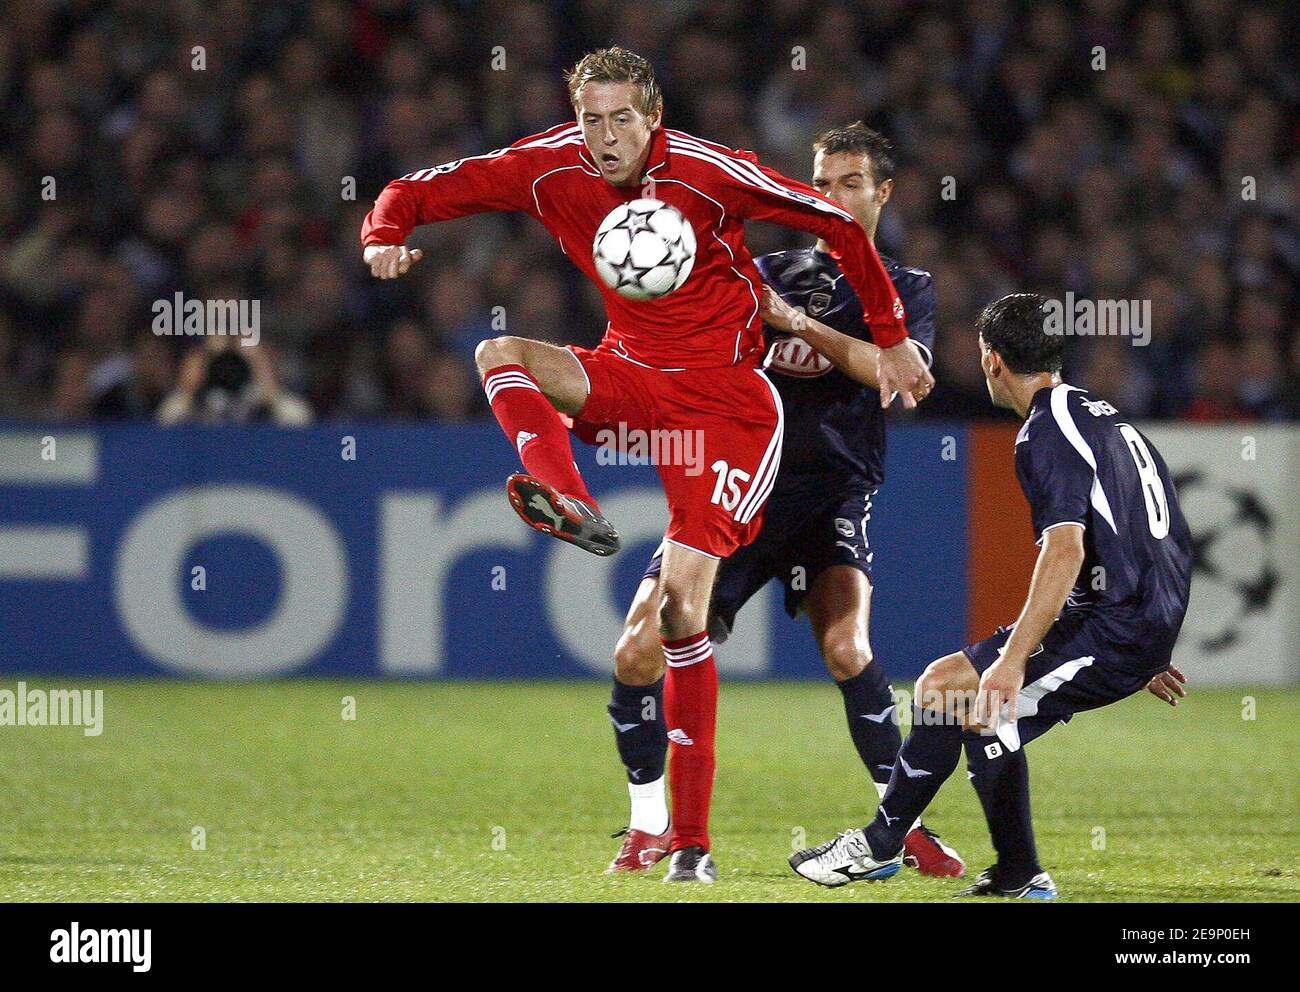 Liverpool's Peter Crouch battles for the ball during the UEFA Champions League, Group C, Girondins de Bordeaux vs Liverpool FC at the Stade Chaban-Delmas in Bordeaux, France on October 18, 2006. Liverpool won 1-0. Photo by Christian Liewig/ABACAPRESS.COM Stock Photo